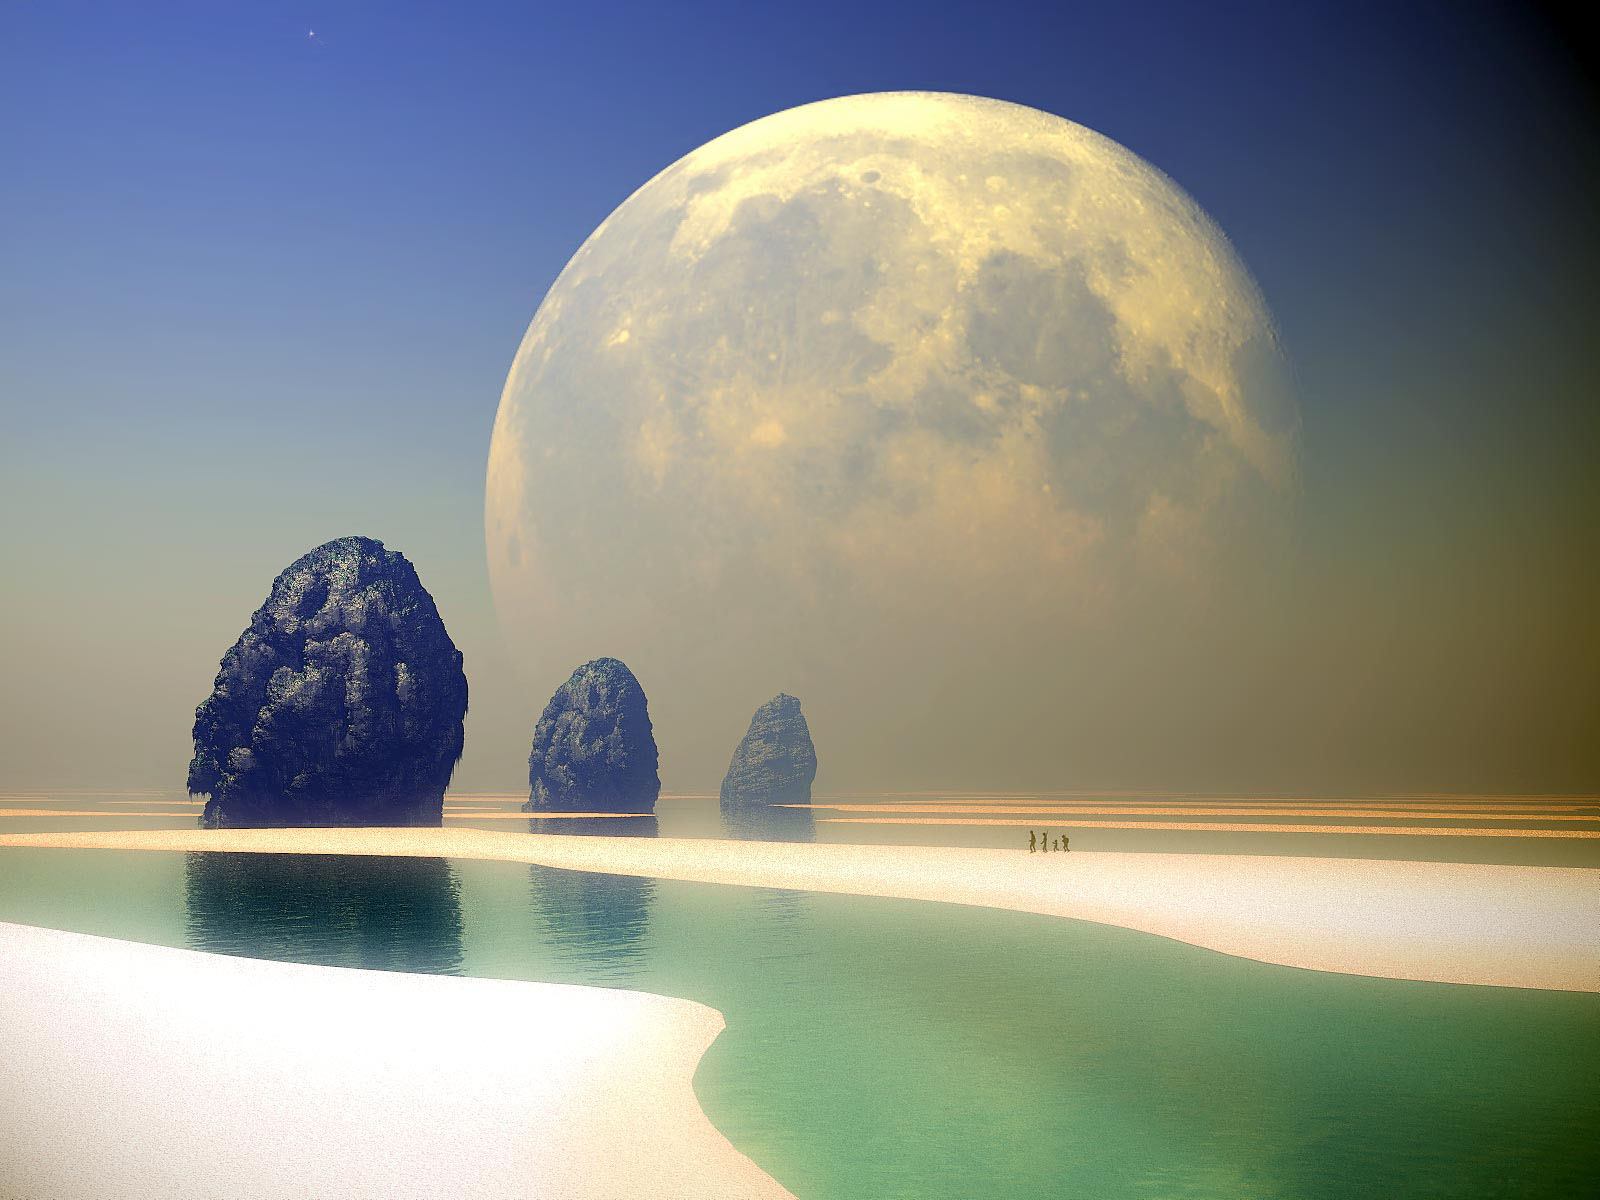 Moon reflecting on calm water